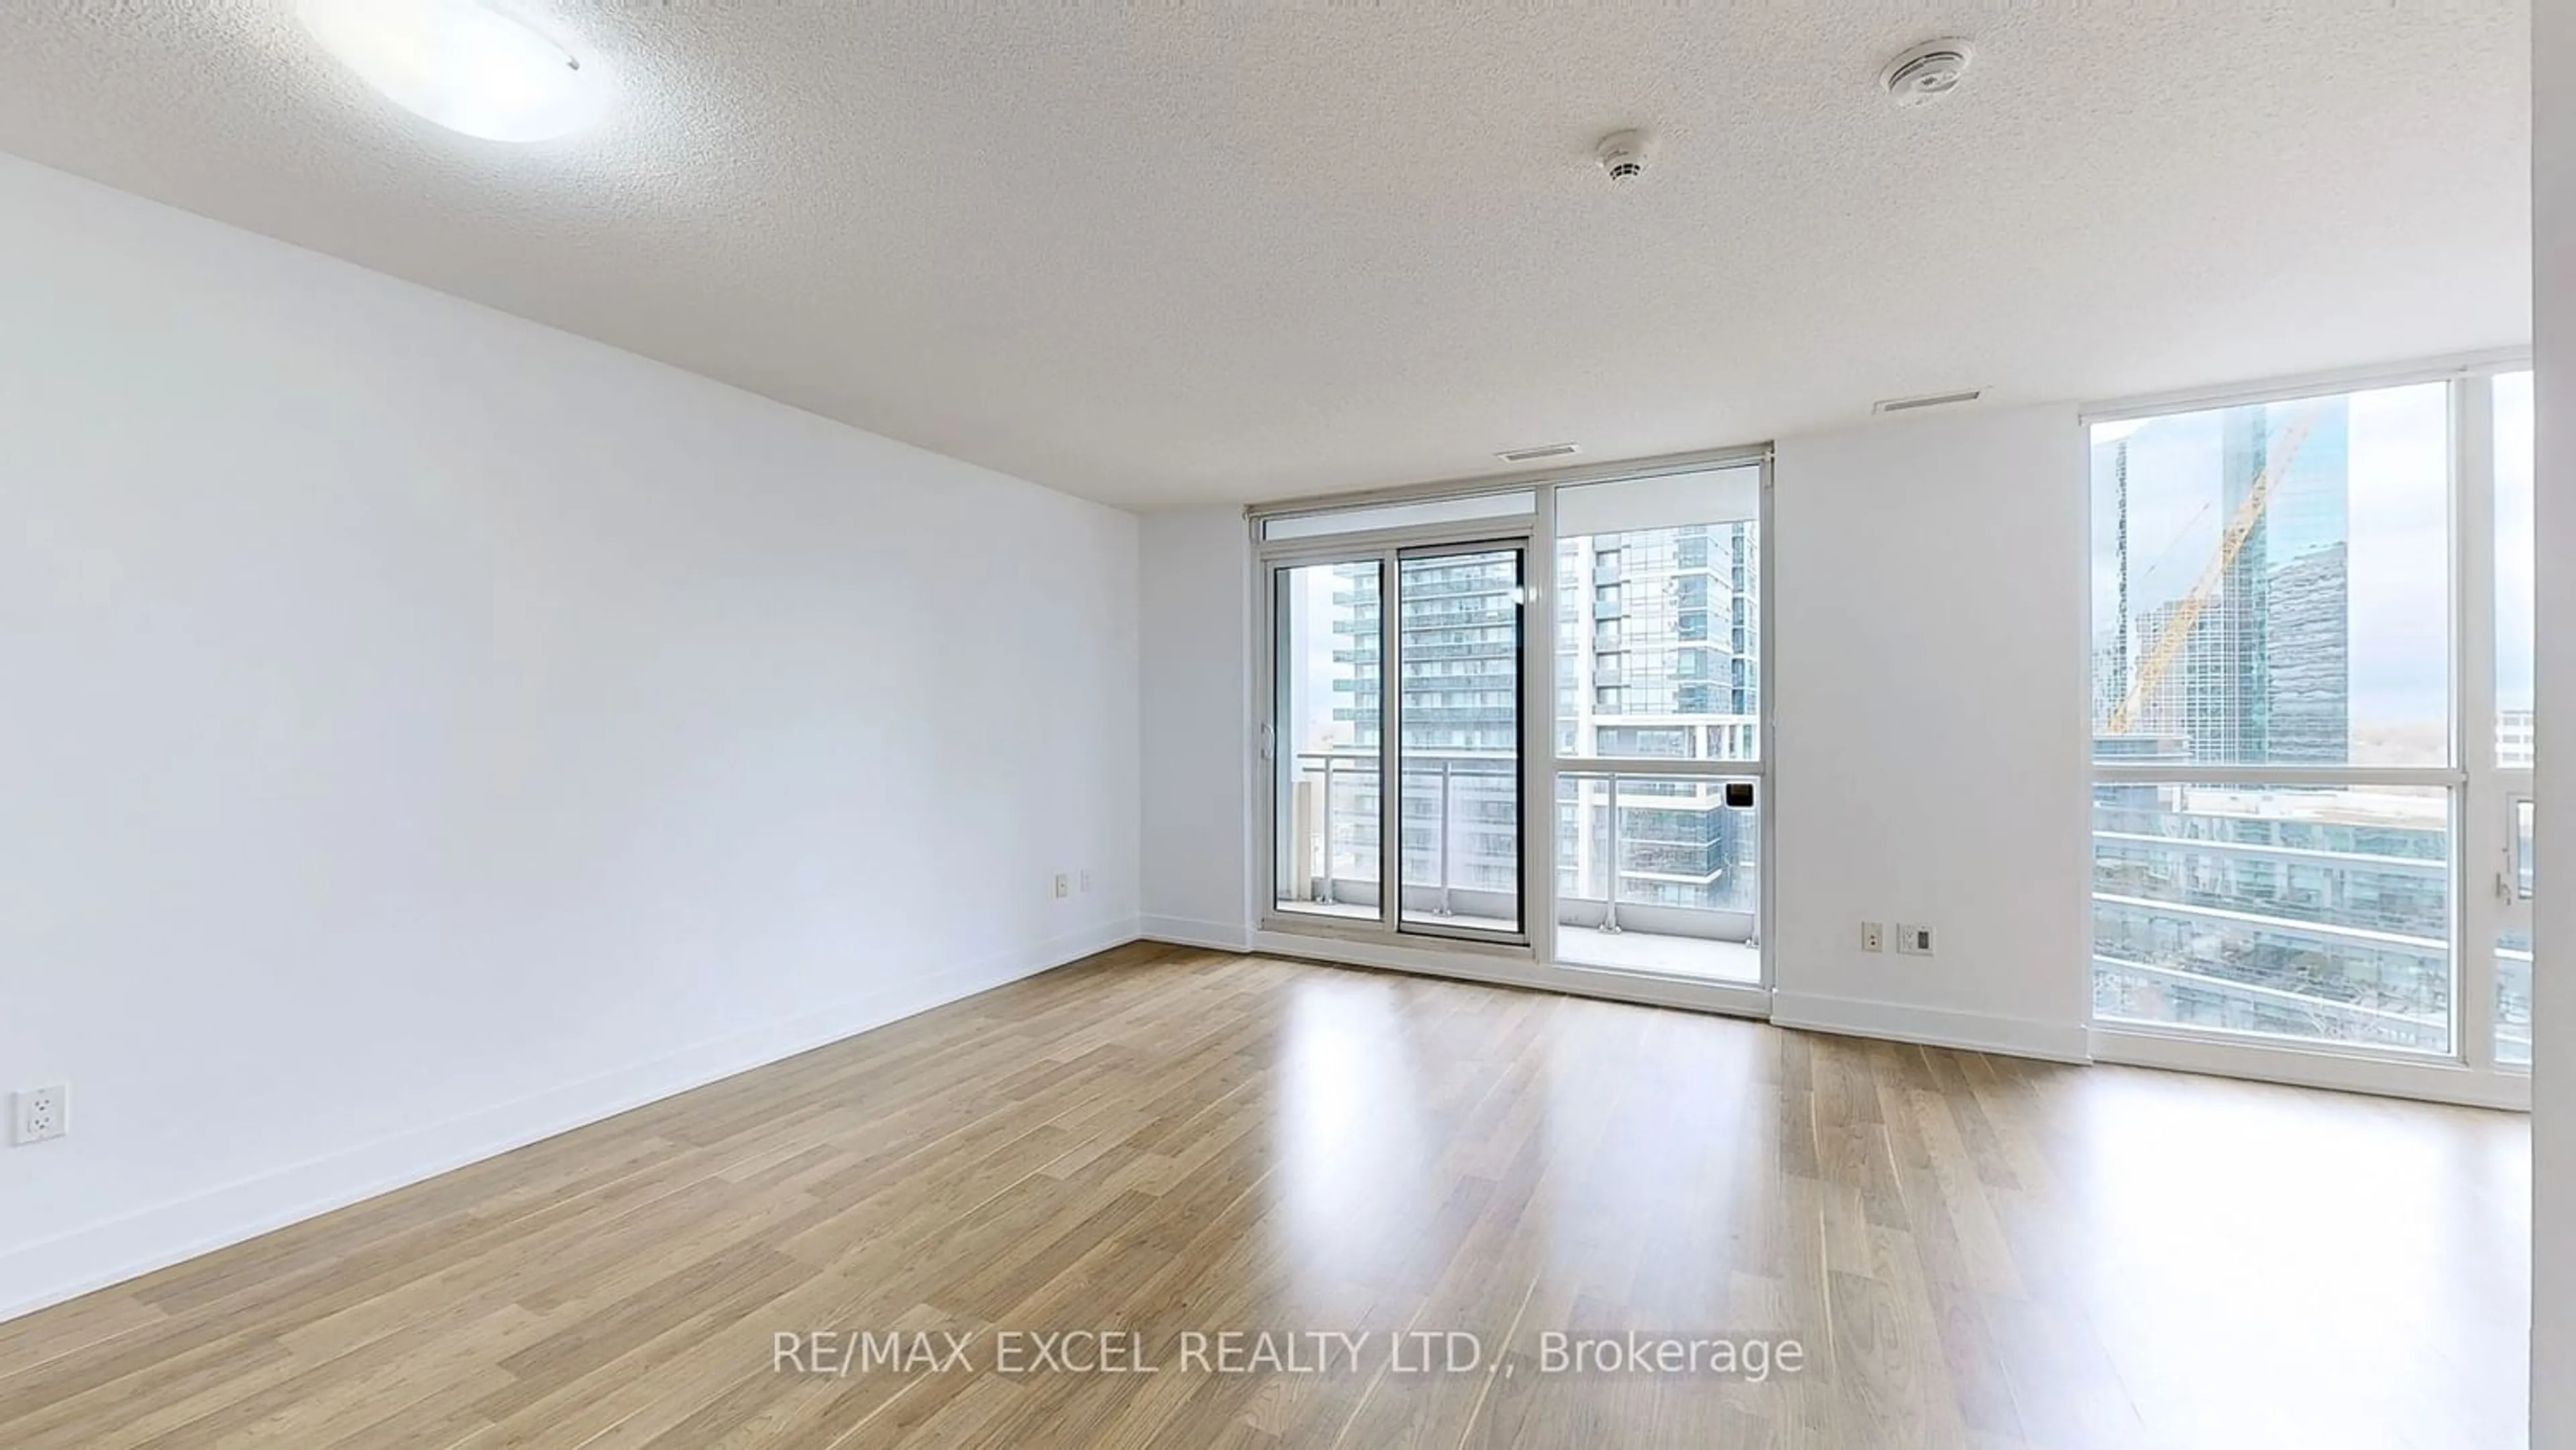 Other indoor space for 23 Sheppard Ave #1402, Toronto Ontario M2N 0C8